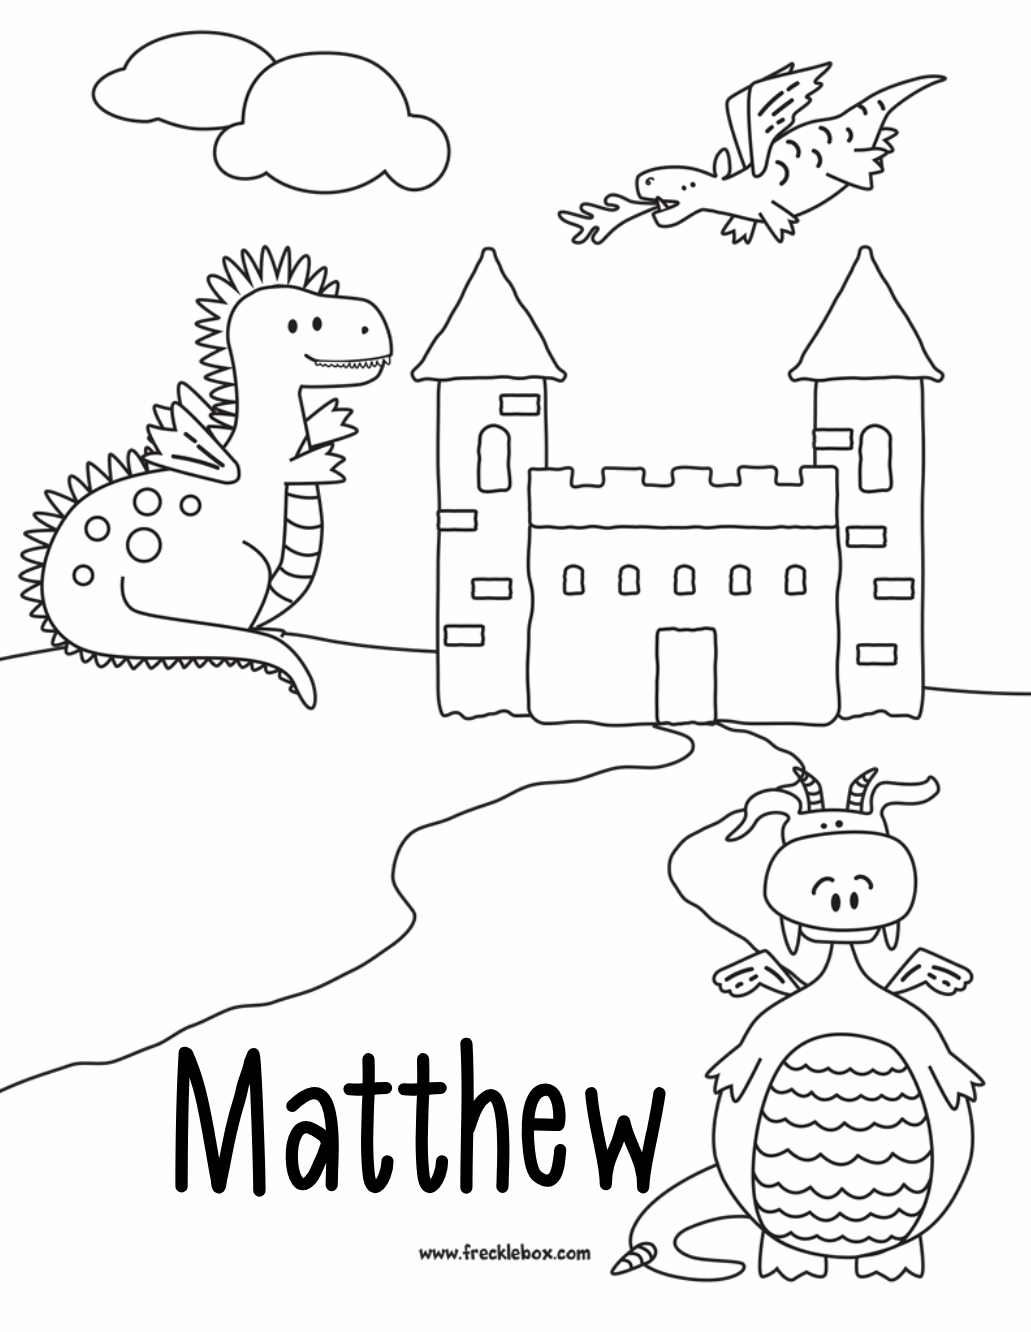 Free personailzed coloring page with dragons and a castle.